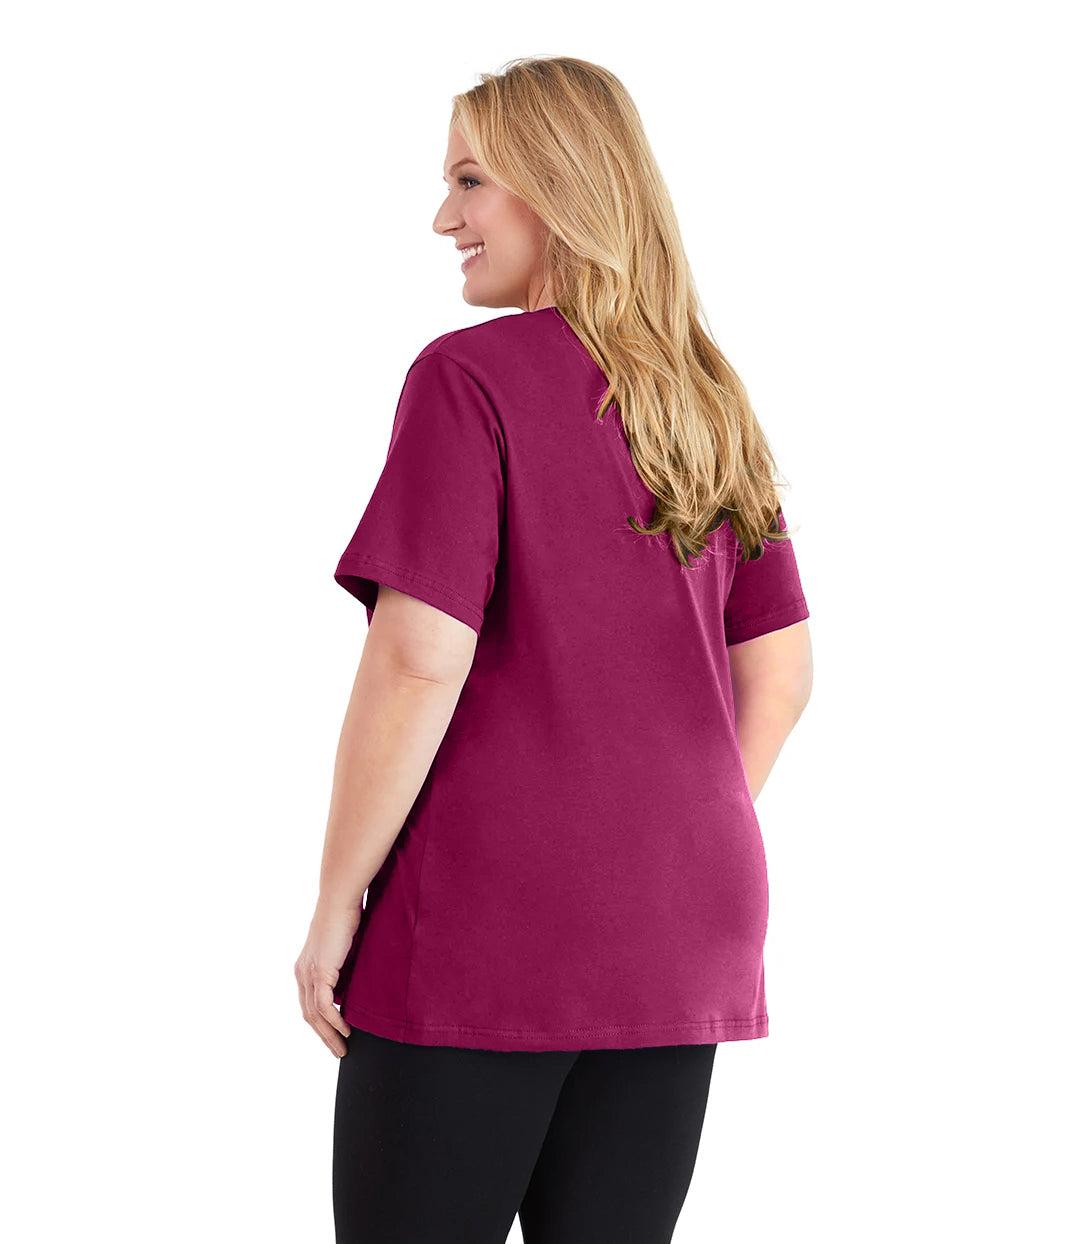 Plus size woman, facing back and looking left, wearing JunoActive plus size Stretch Naturals V-Neck in the color Merlot. She is wearing JunoActive Plus Size Leggings in the color black.